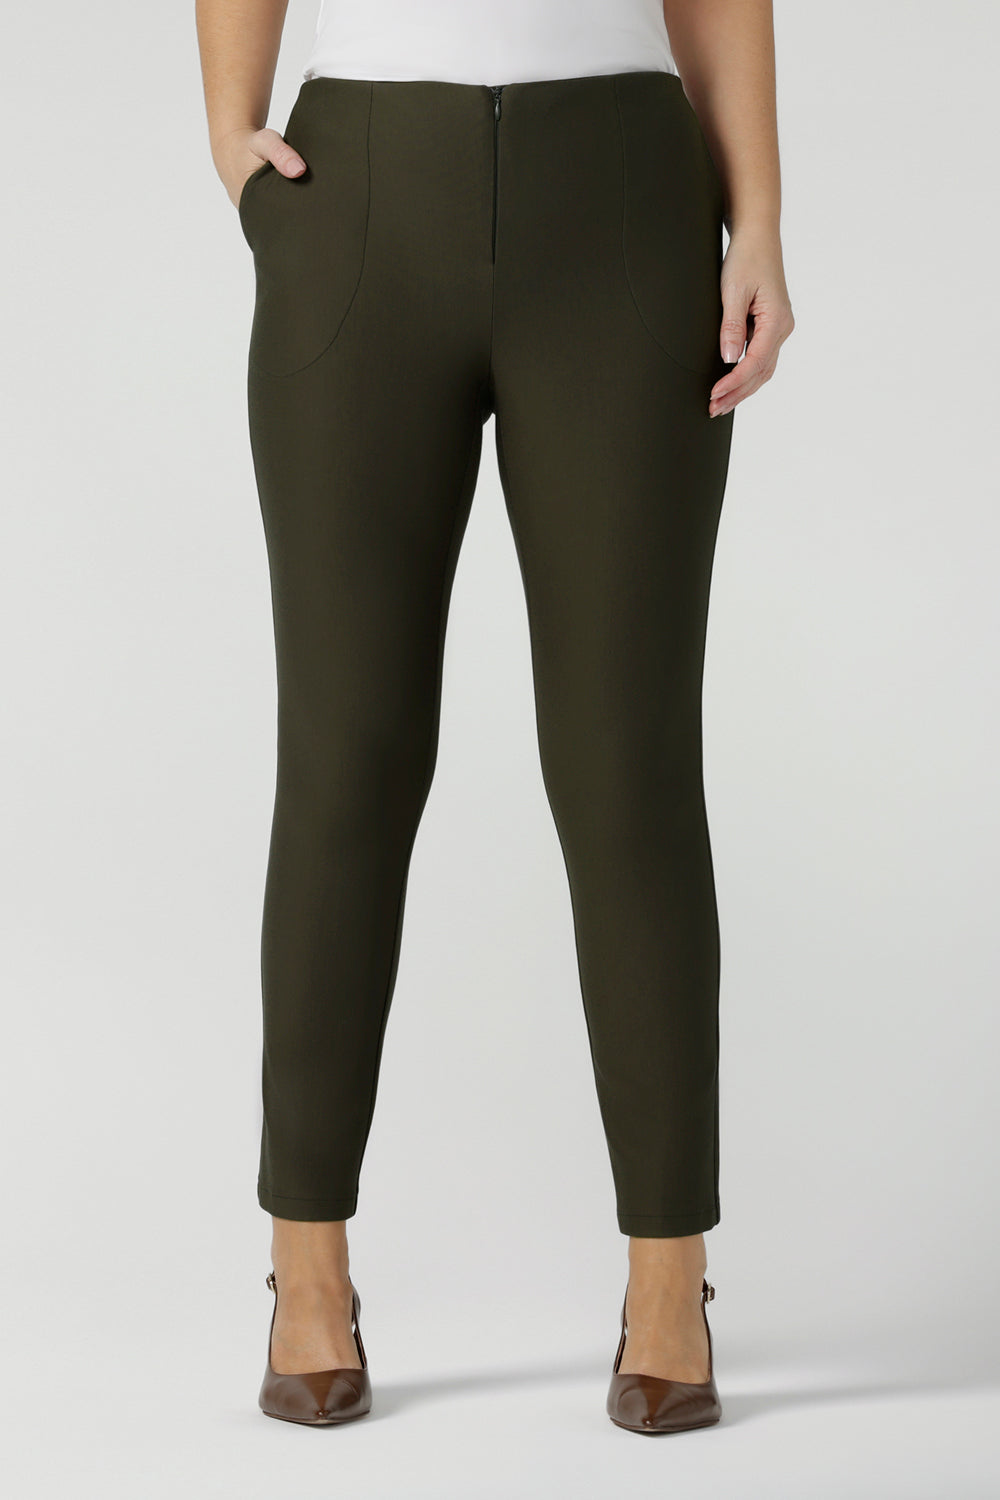 Close up of slim leg, cropped length pants in olive green. Tailored skinny pants with pockets and a front zip fastening these made-in-Australia  work pants fit petite, mid size and plus size women.